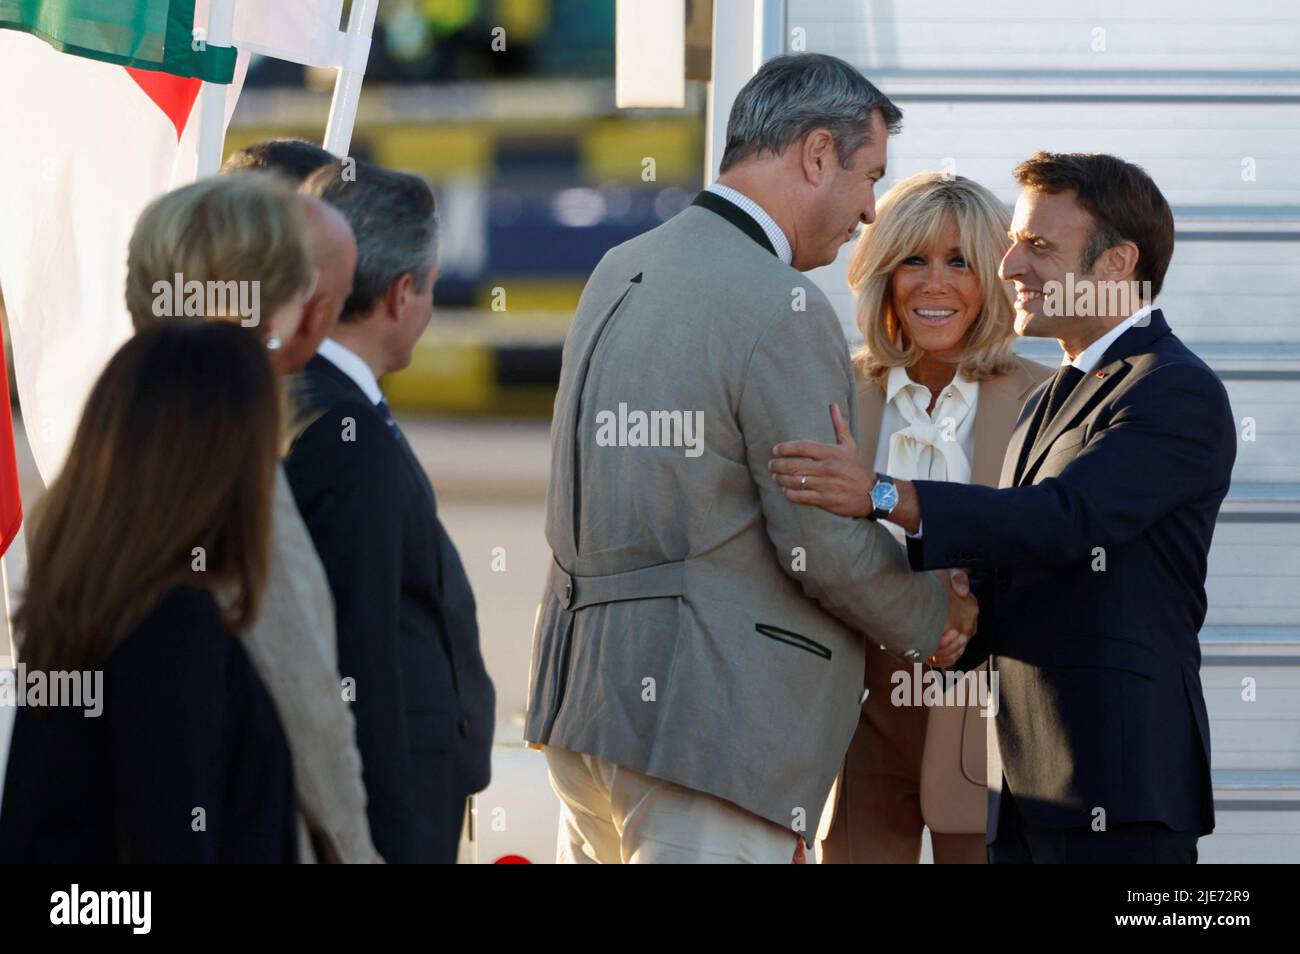 French President Emmanuel Macron and his wife Brigitte Macron are greeted by Bavaria's State Premier Markus Soeder upon their arrival at Franz-Josef-Strauss airport in Munich ahead of the G7 summit, which will take place in the Bavarian alpine resort of Elmau Castle, Germany, June 25, 2022. REUTERS/Michaela Rehle Stock Photo